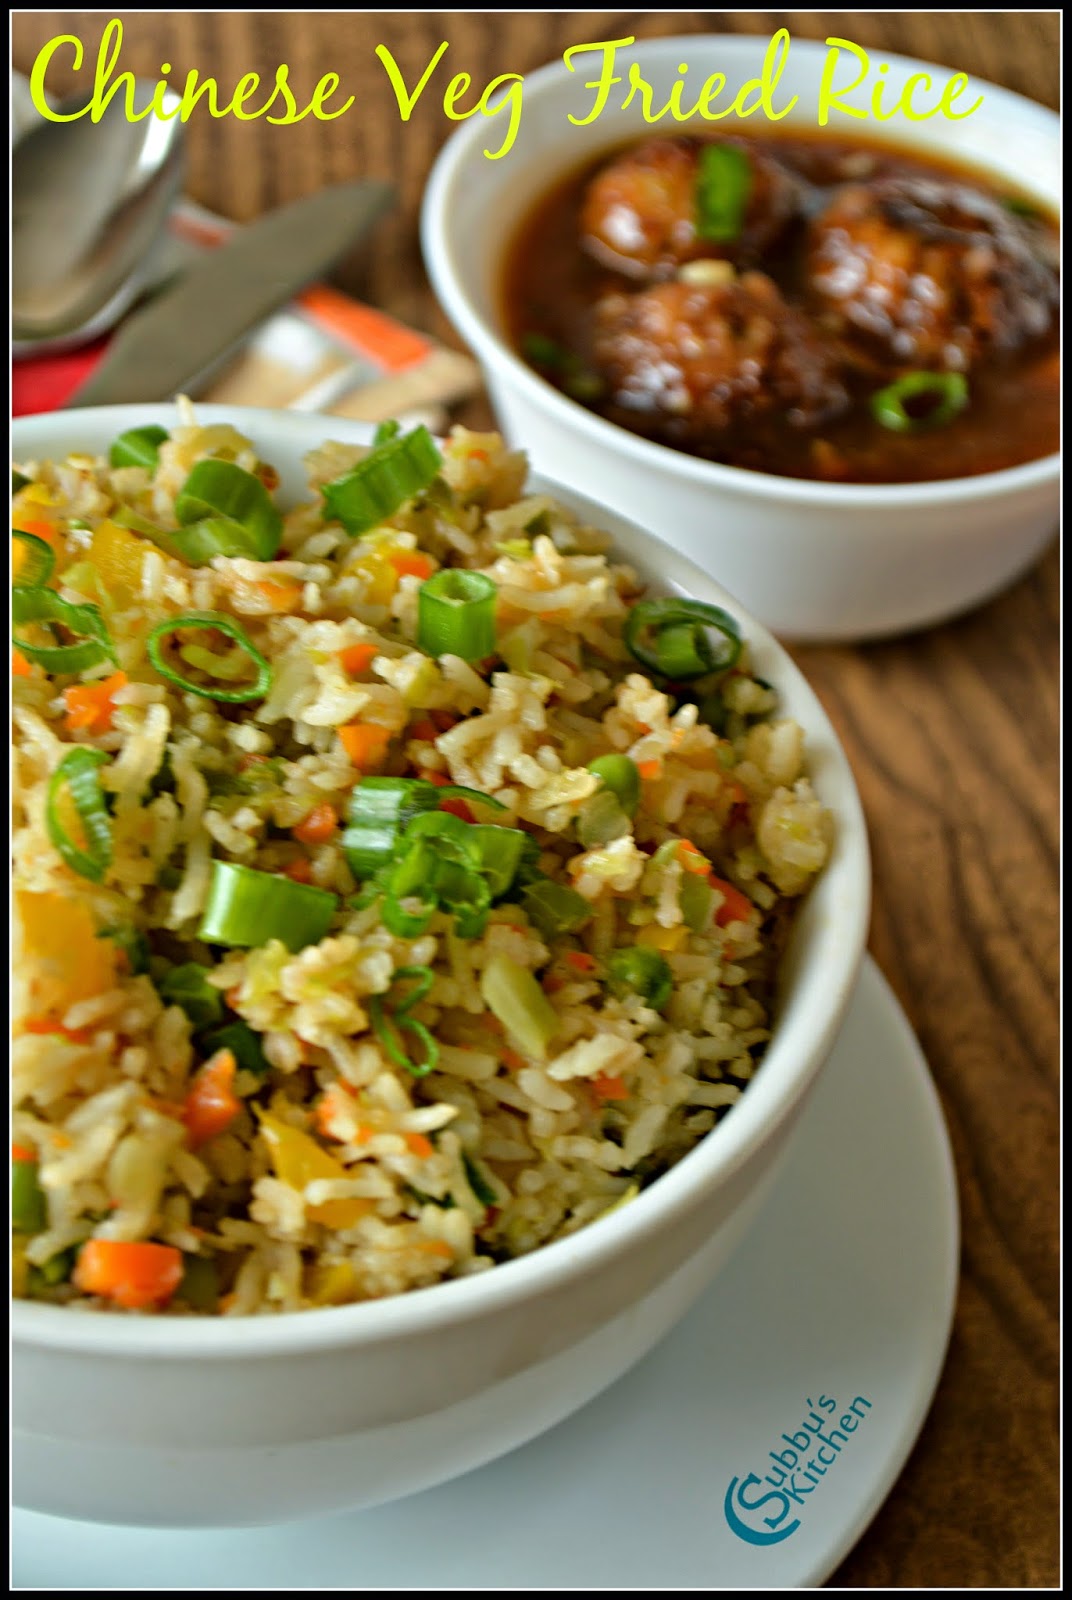 Chinese Vegetable Fried Rice Recipe - Subbus Kitchen